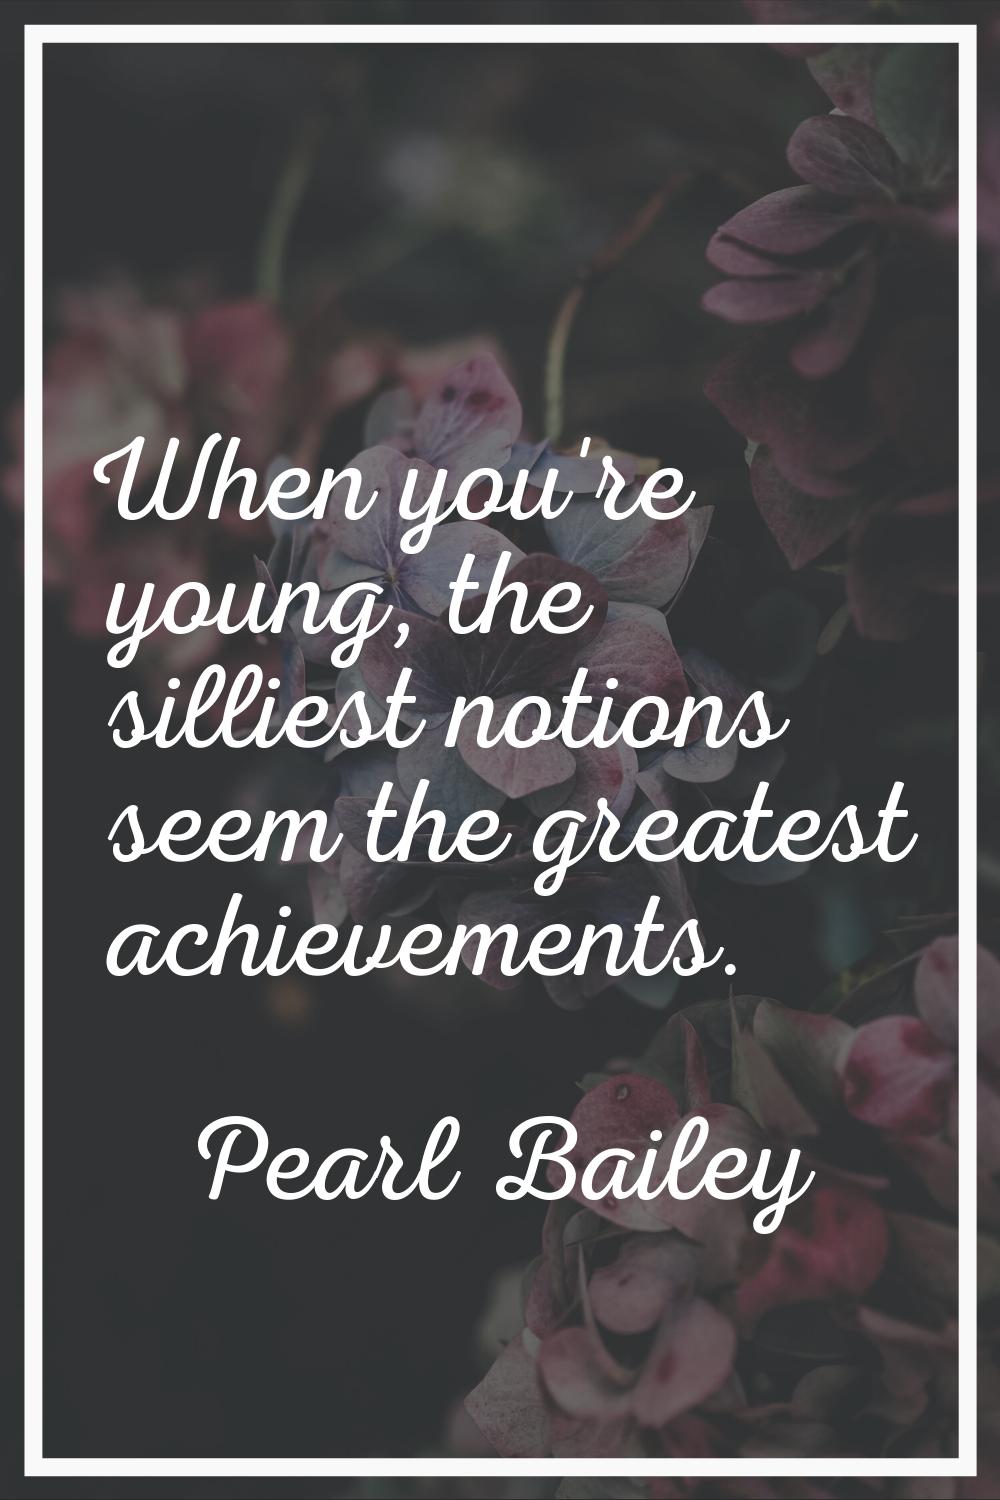 When you're young, the silliest notions seem the greatest achievements.